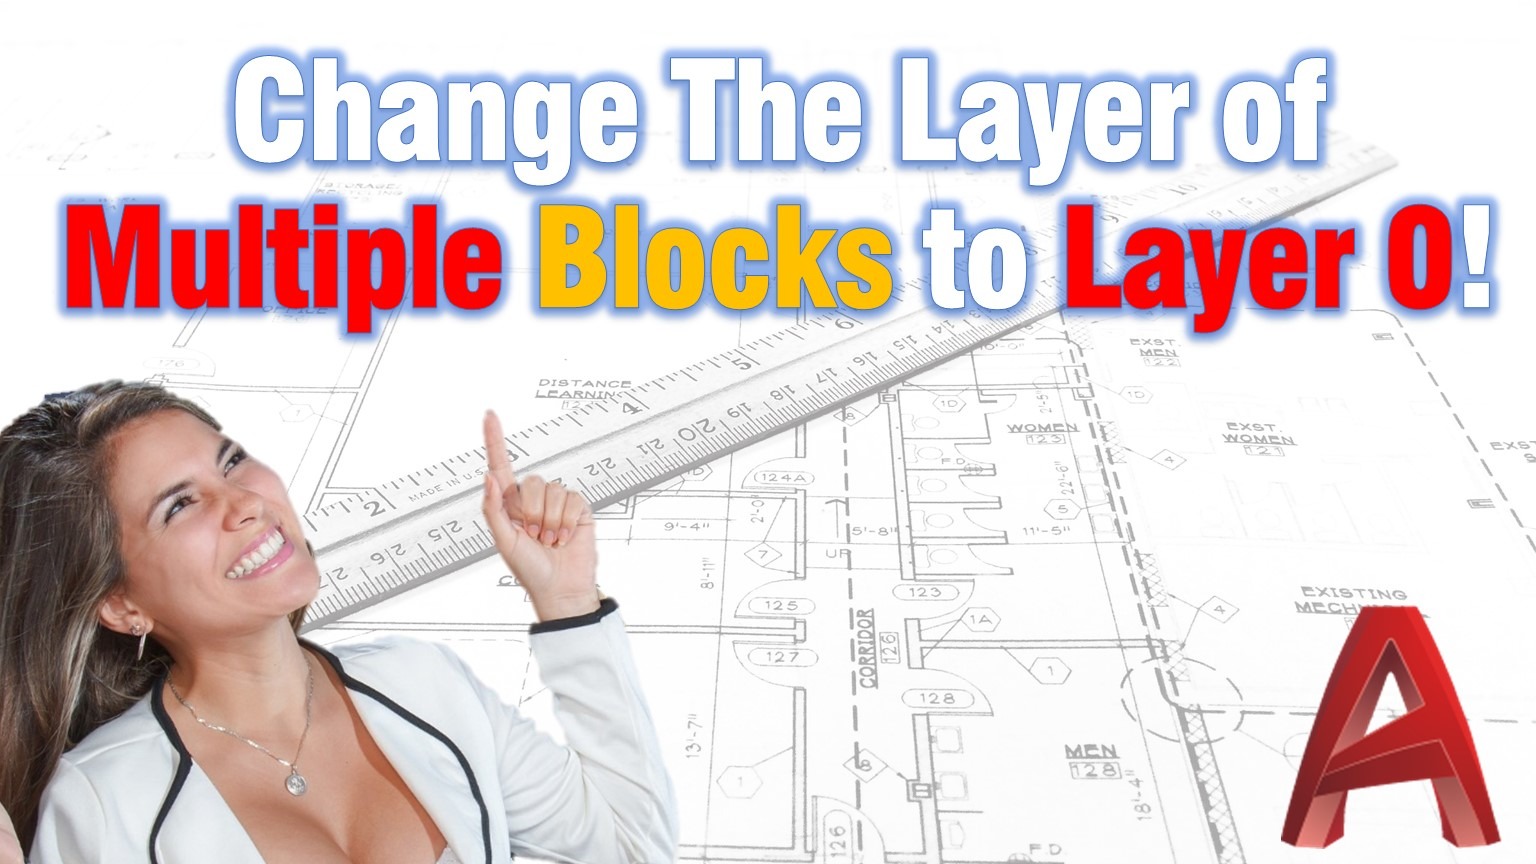 Change layer of multiple blocks to layer 0!